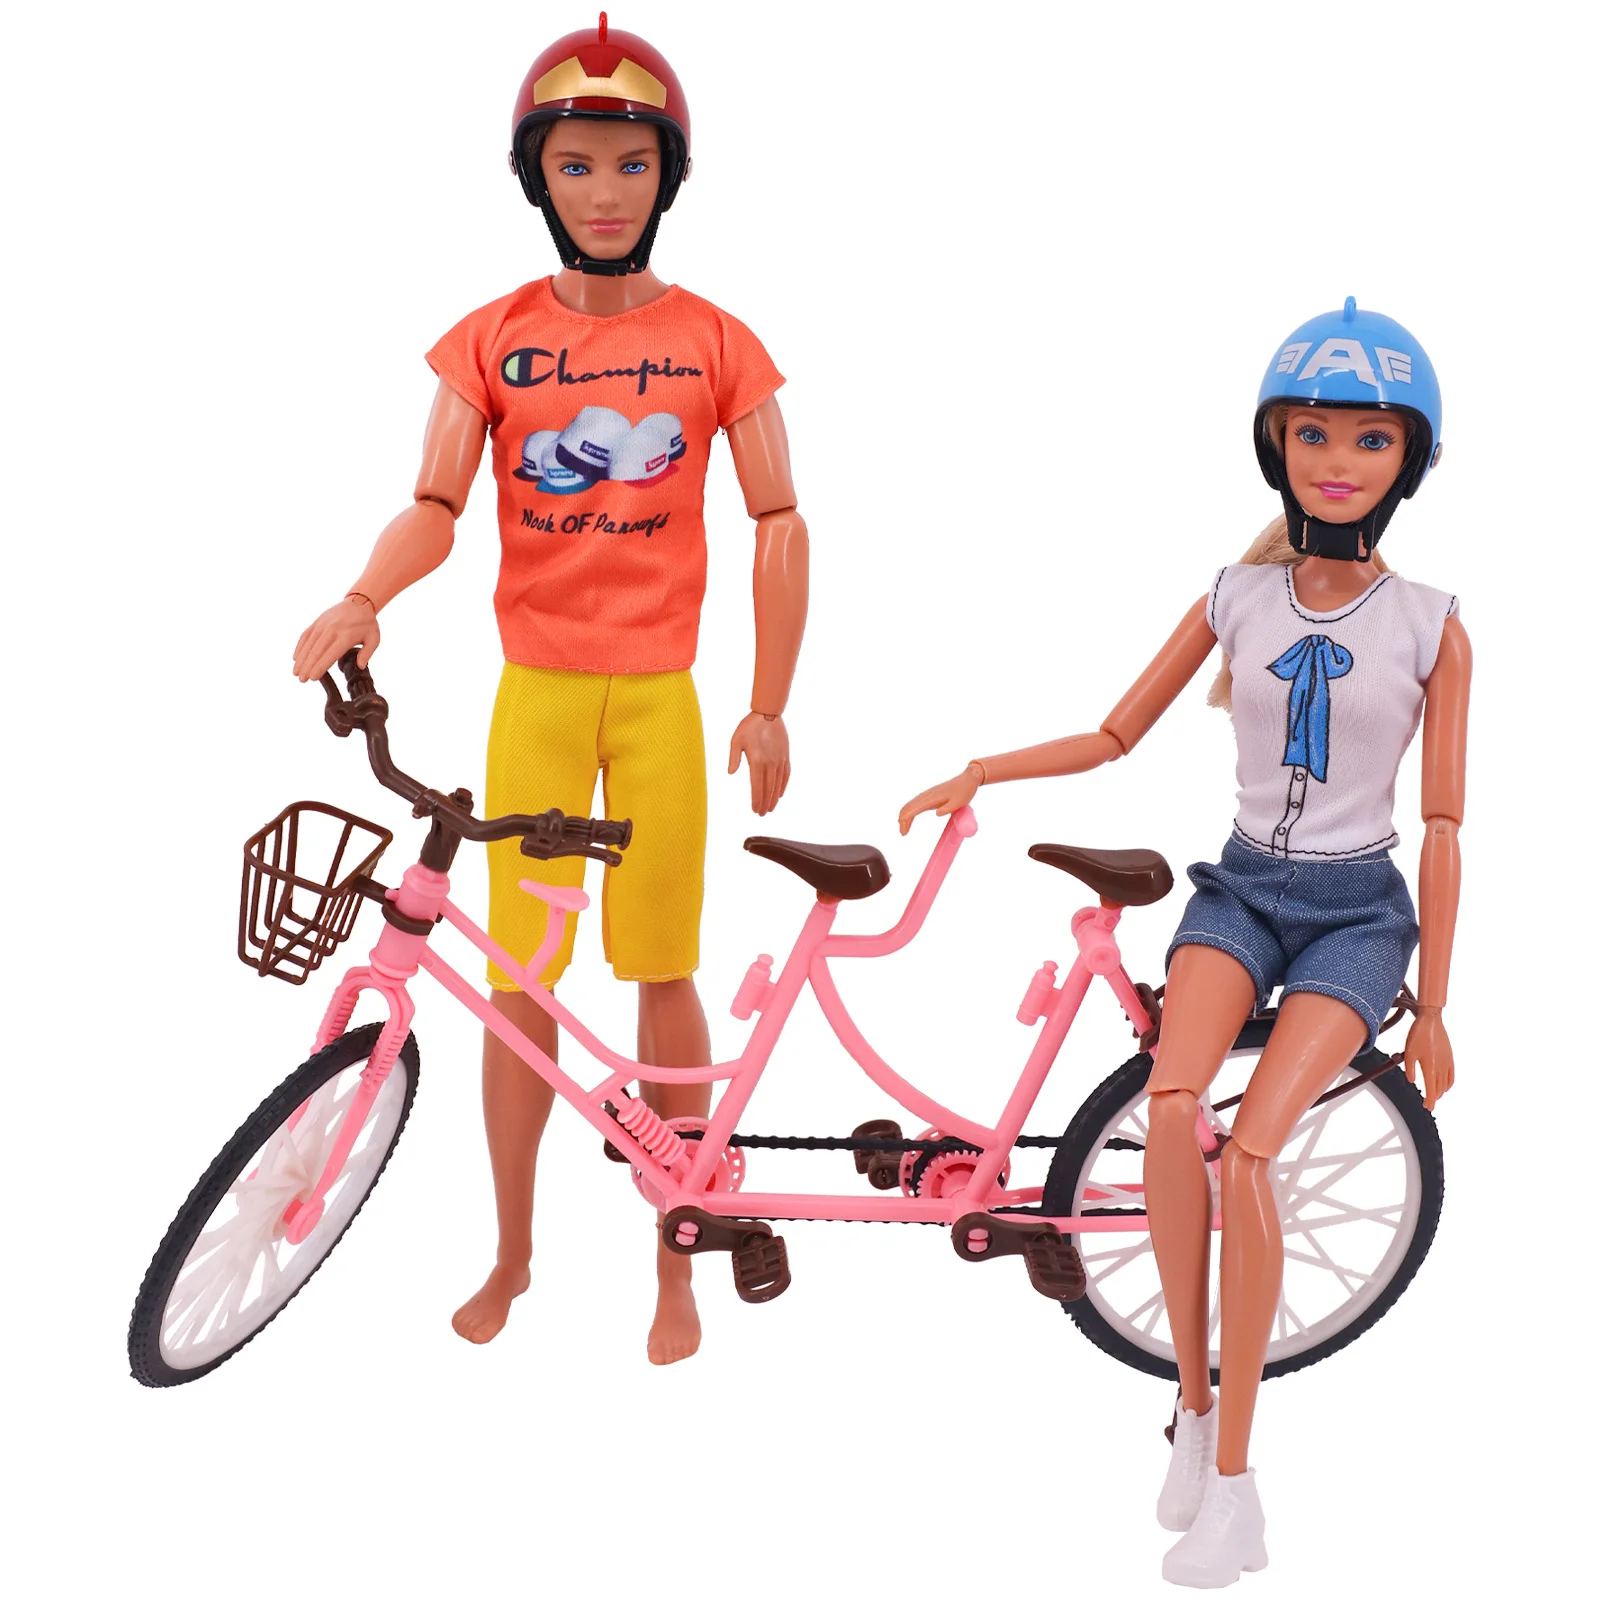 Barbiees Miniature Helmet Toy Doll House Accessories Bicycle Protection Hat Helmet(Wthout Keychain) Barbiees&BJD DollAccessories tciheadset tactical helmet wendy arc rail adapter for walker s razor electronic hearing protection shooting headset accessories